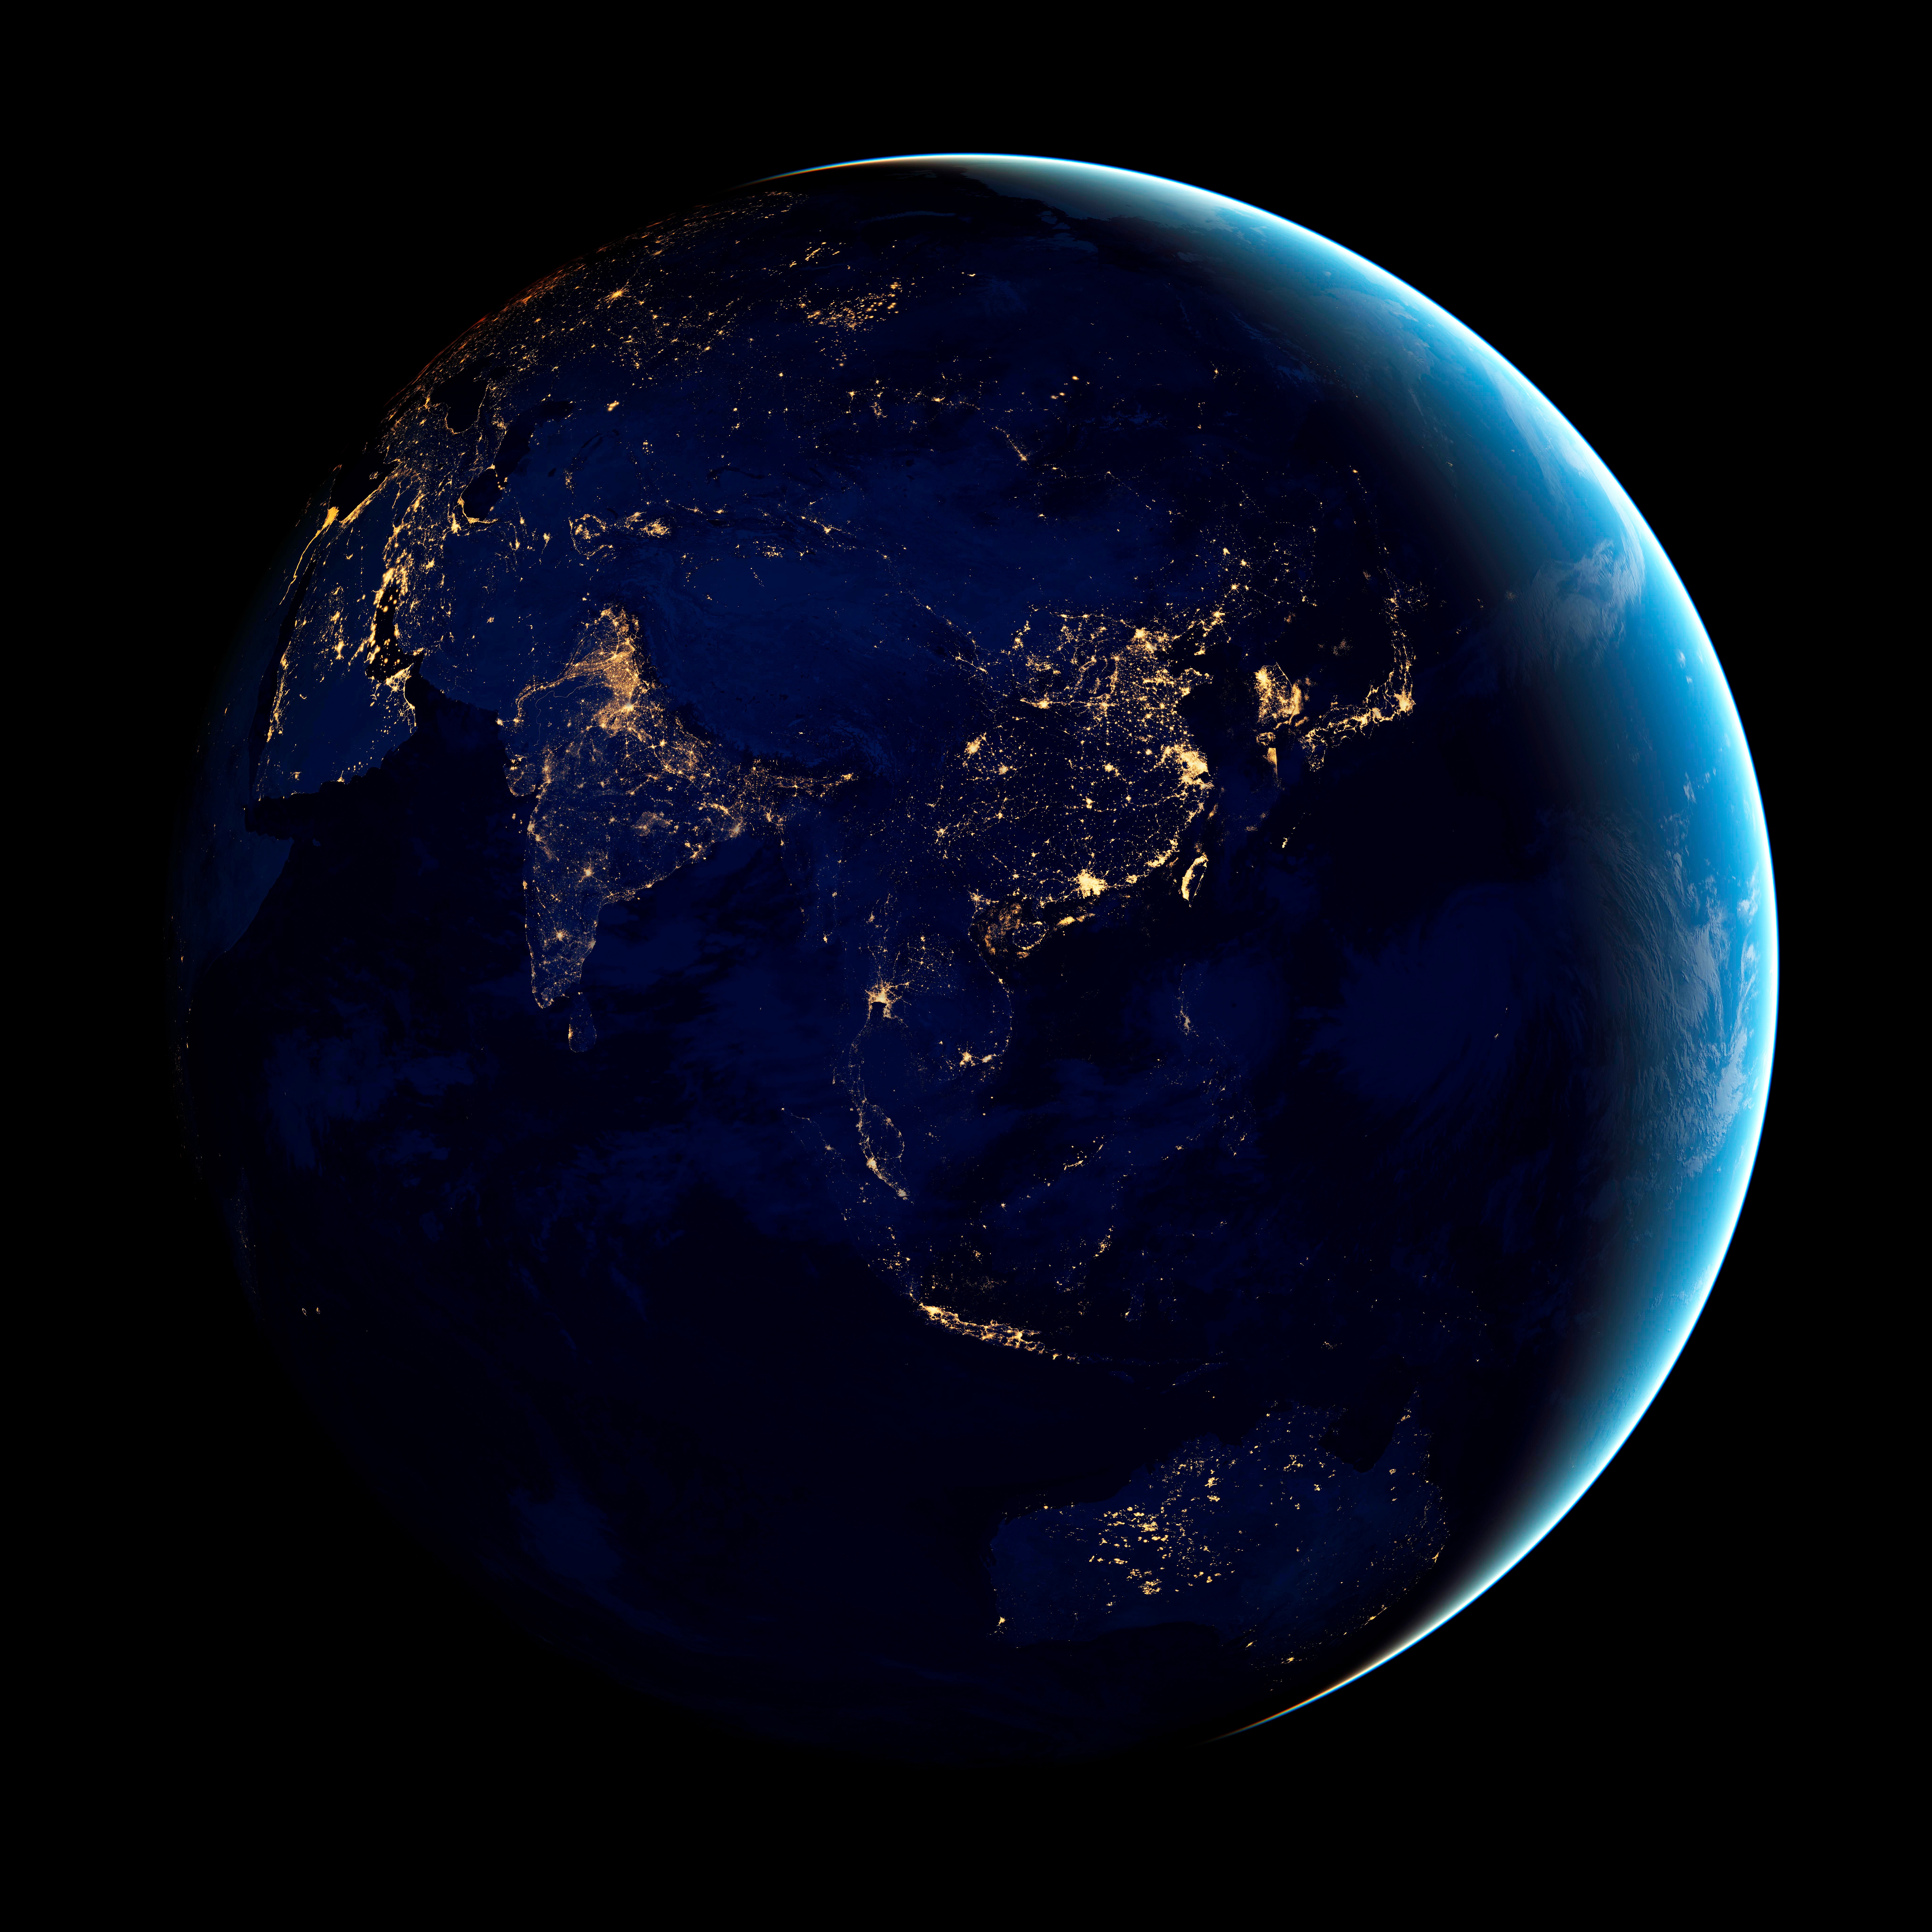 HD wallpaper, Earth At Night, Asia, Planet Earth, 5K, 8K, Black Background, India